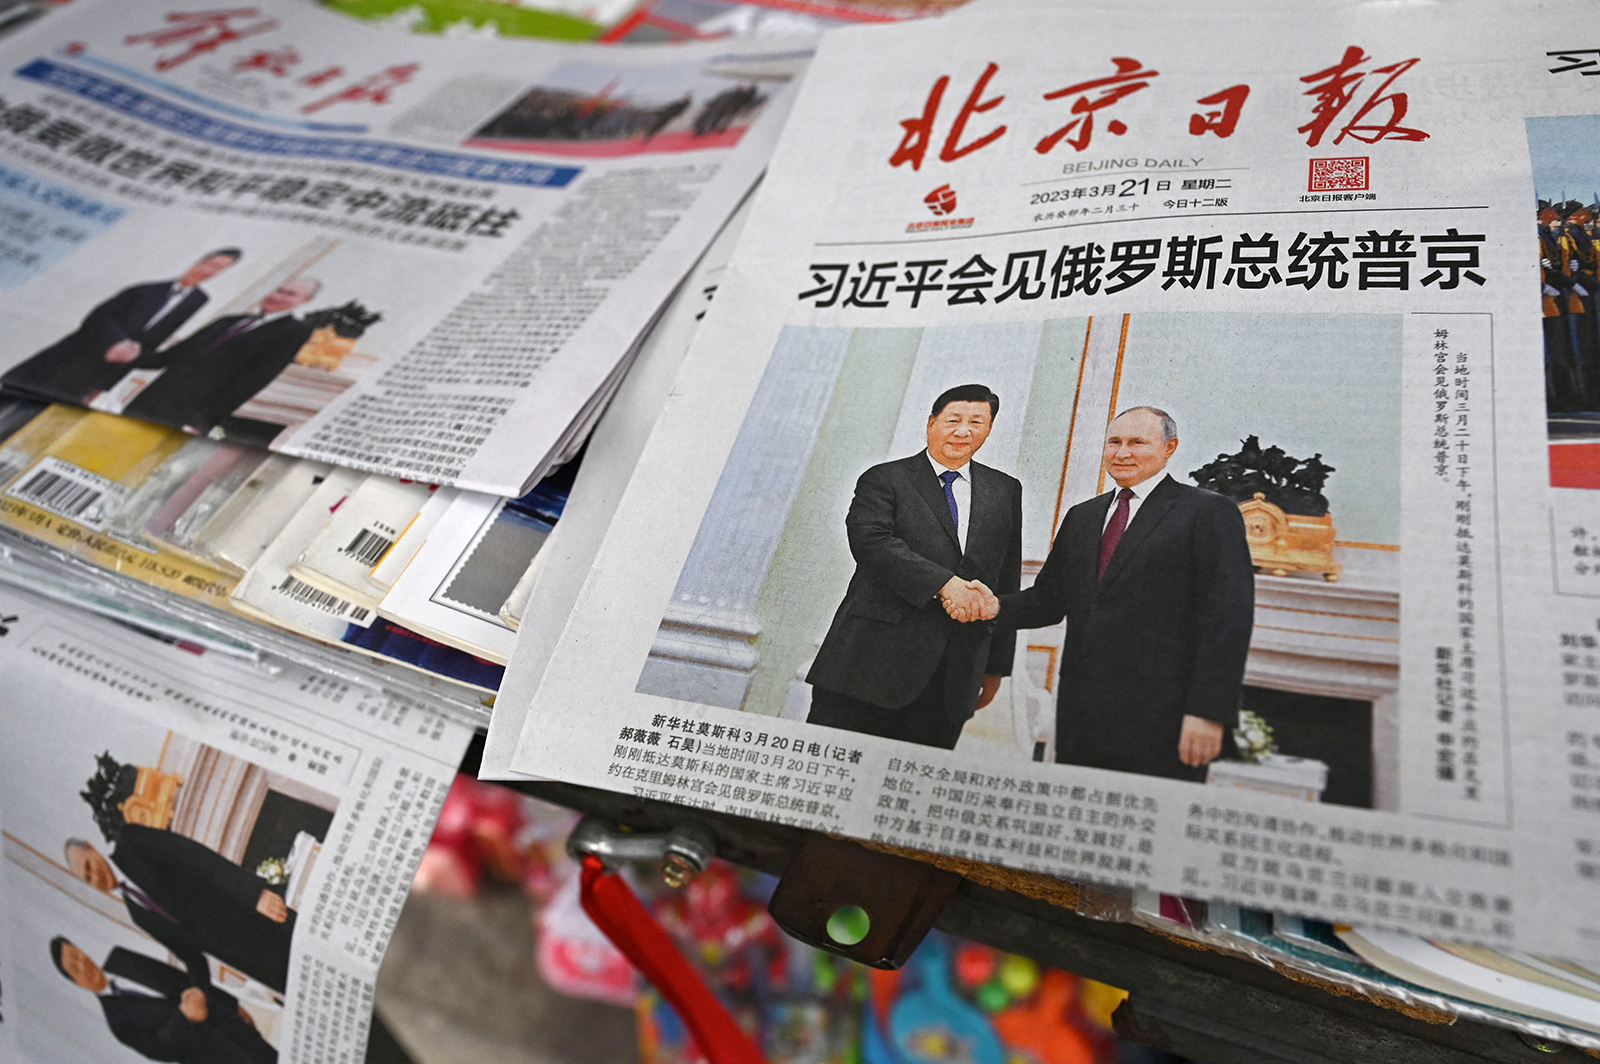 Newspapers featuring a front page photo of Chinese leader Xi Jinping meeting with Russian President Vladimir Putin in Moscow, are displayed at a news stand in Beijing on March 21.